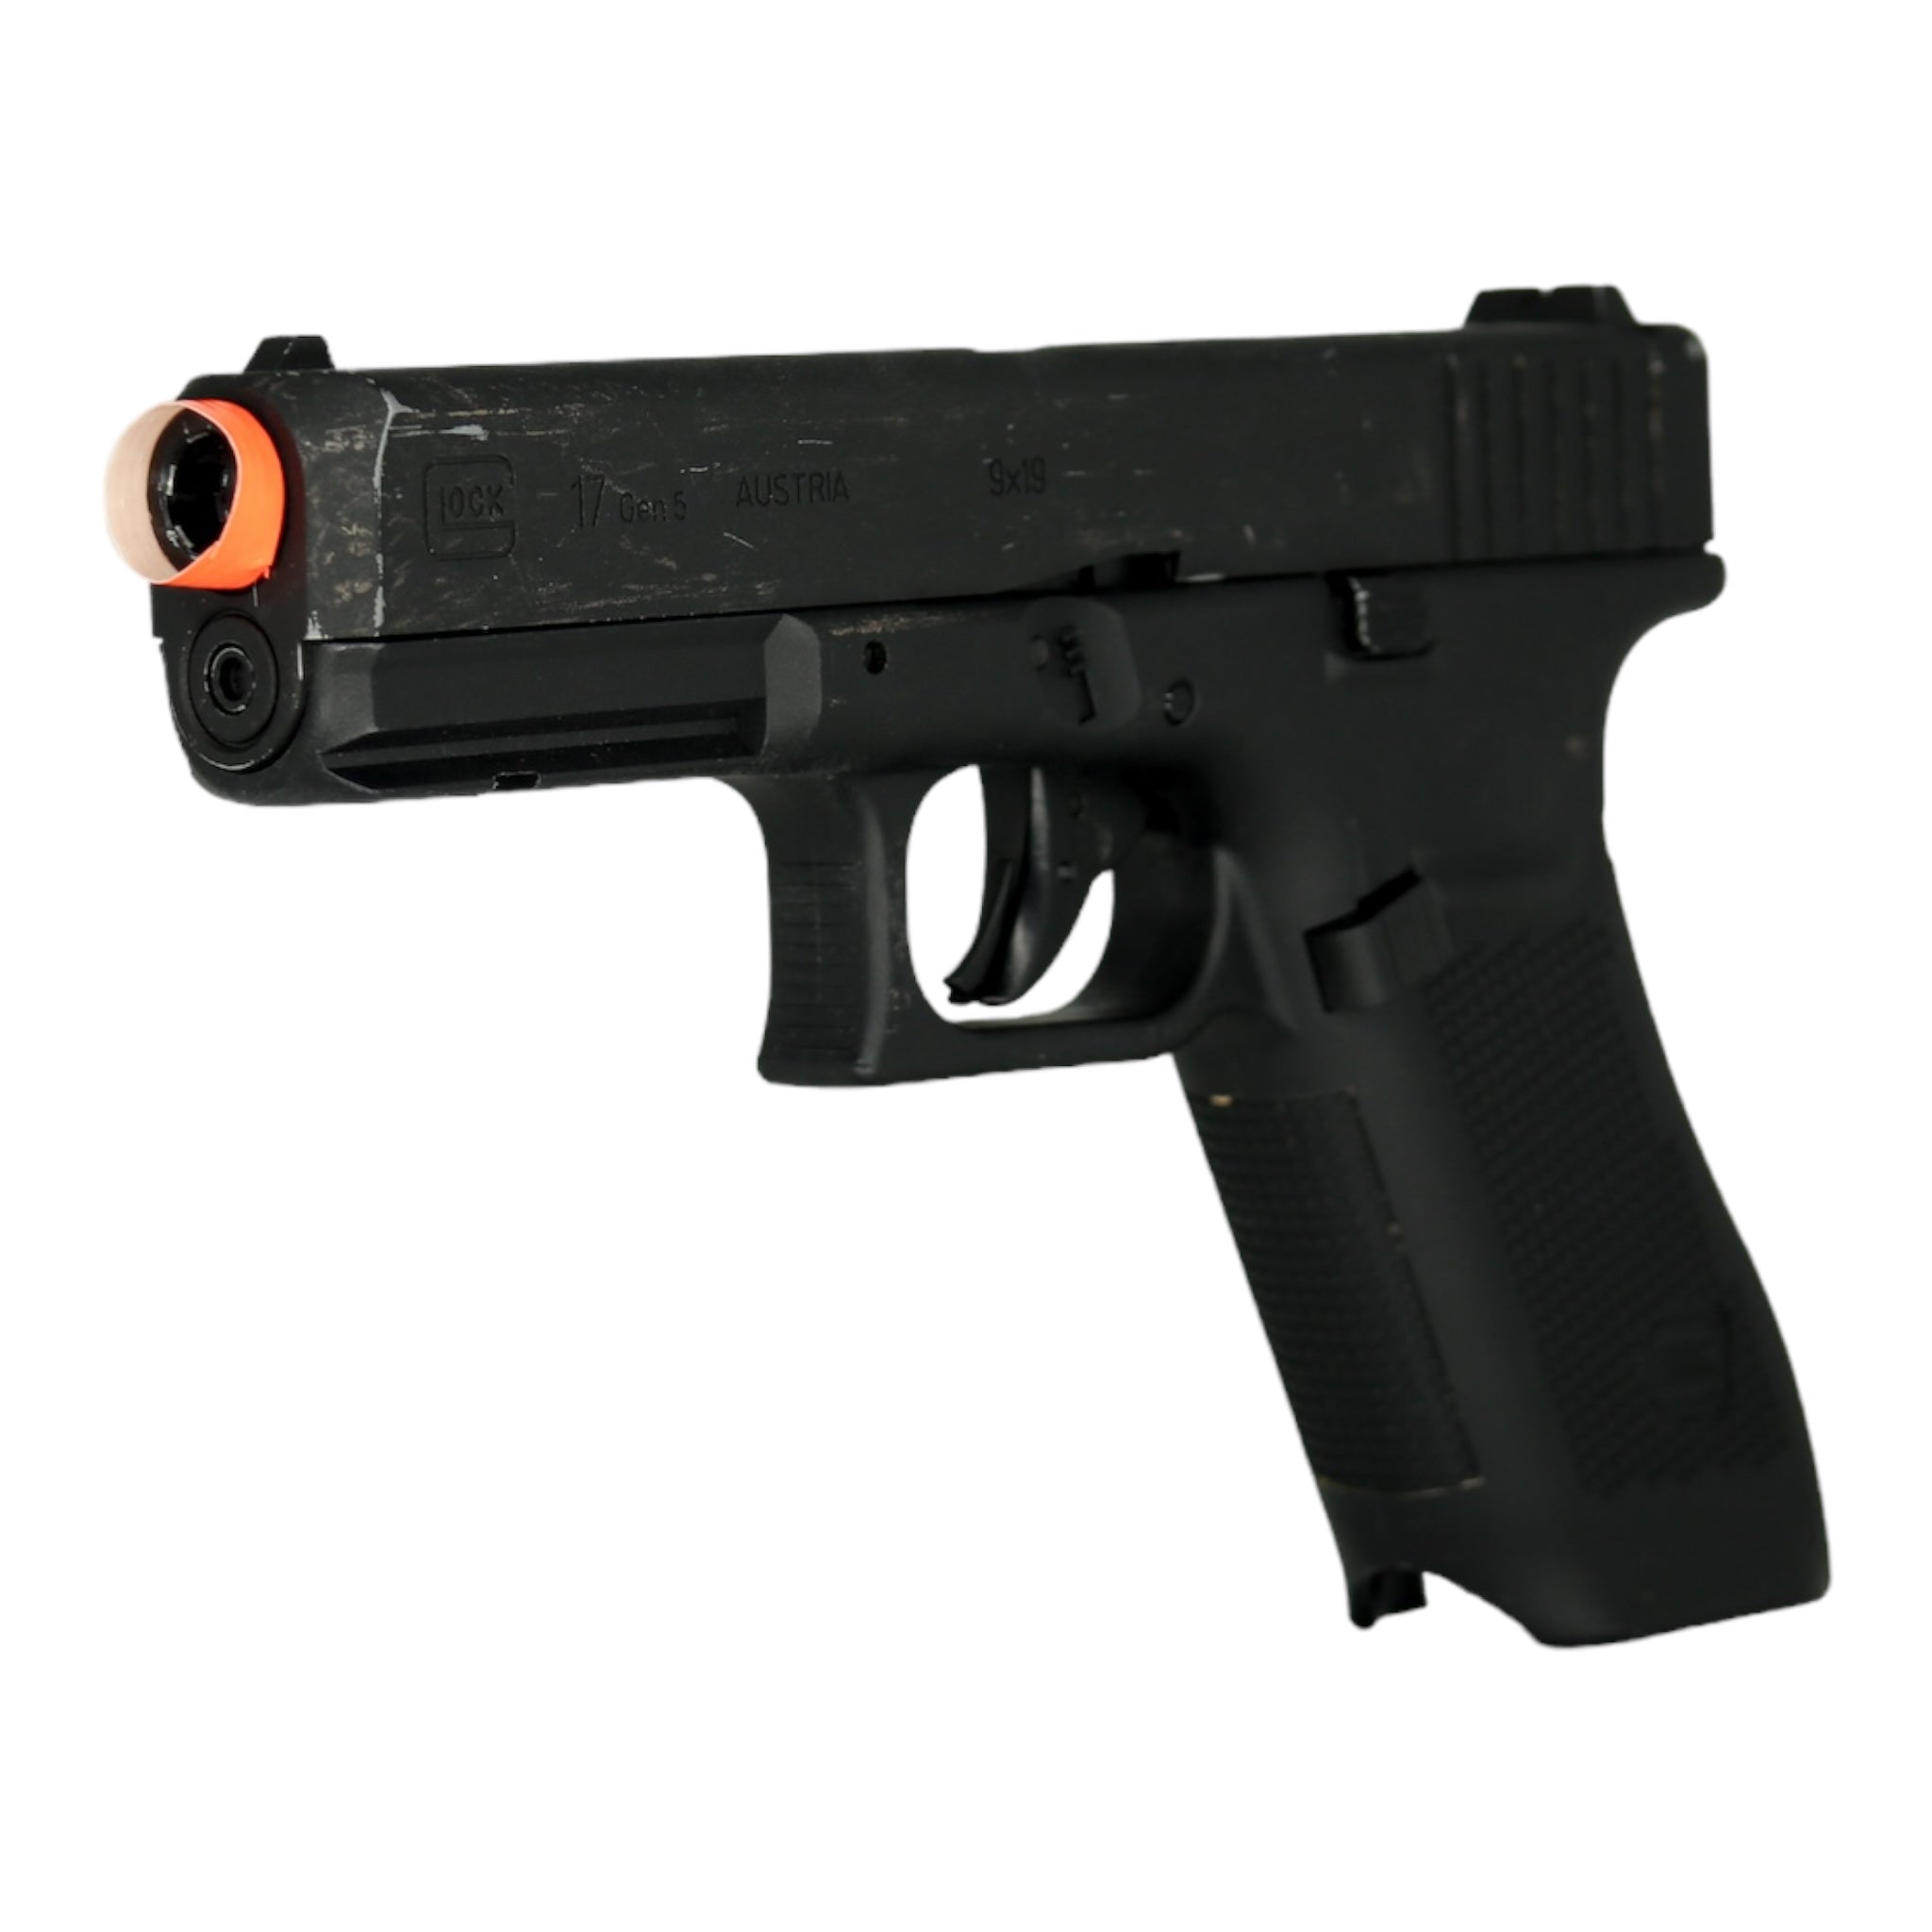 Pre-Owned GLOCK 17 GEN5 CO2 GBB Pistol w/ 2 Magazines - ssairsoft.com